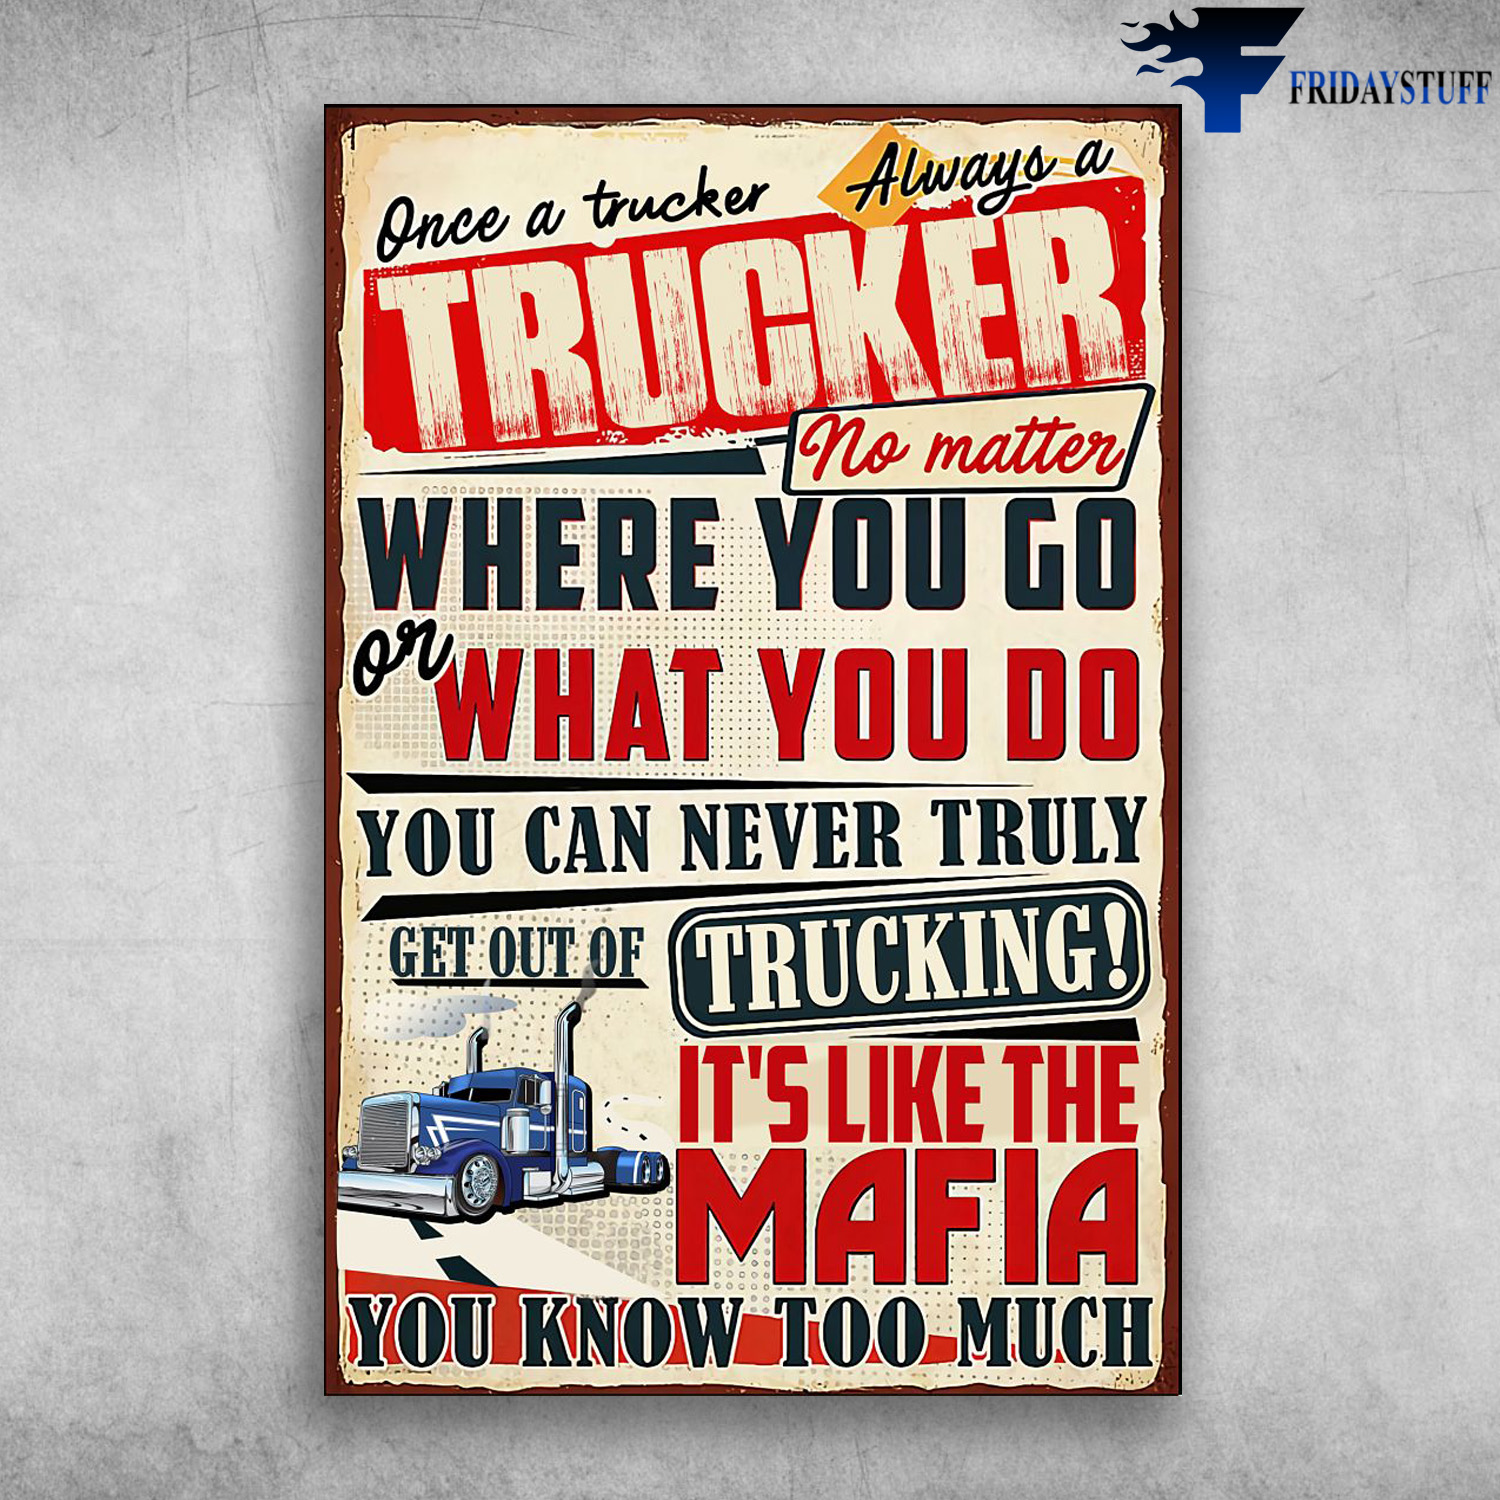 The Truck - Once A Trucker, Always A Trucker, No Matter Where You Go Or What You Do, You Can Never Truly, Get Old Of Trucking, It's Like The Mafia, You Know Too Much